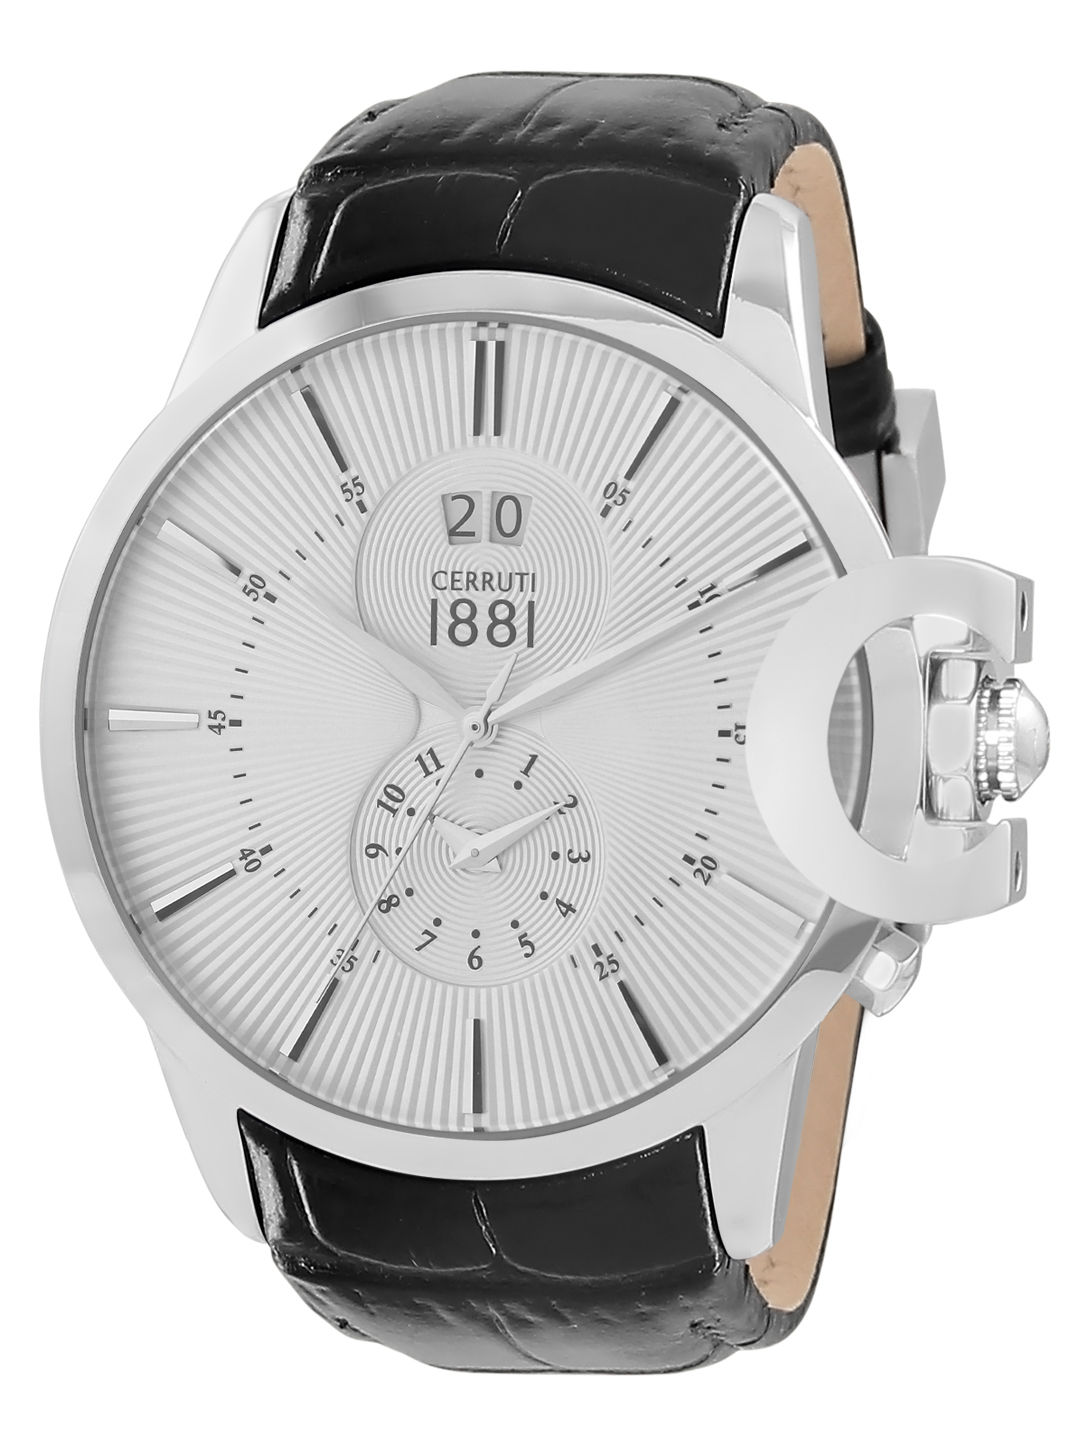 Online Elegant Watch Cerruti 1881 with Flowers Gift Delivery in UAE - FNP